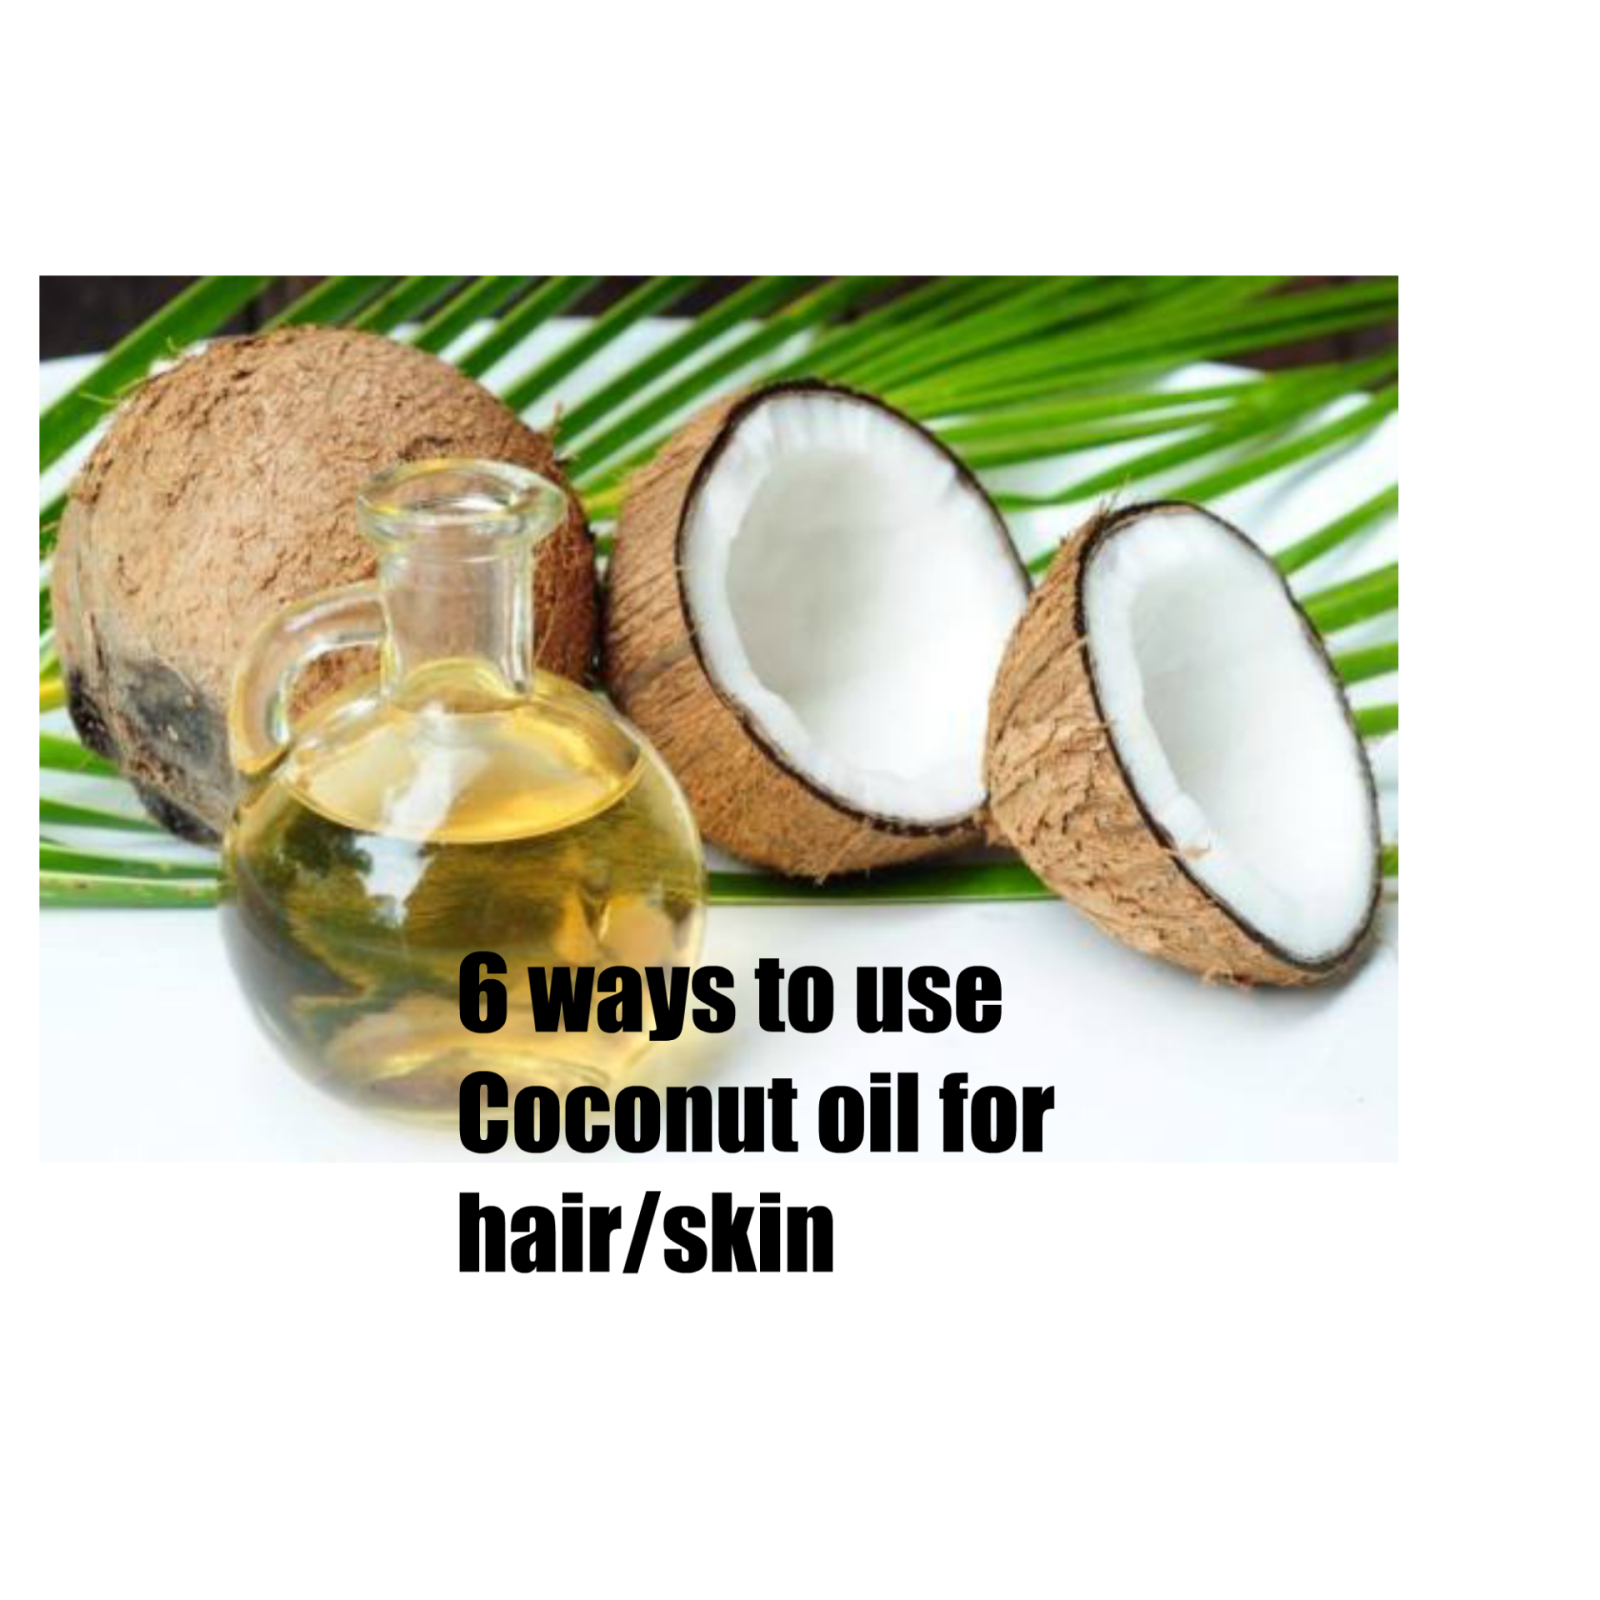 6 ways to use Coconut Oil for Hair/Skin